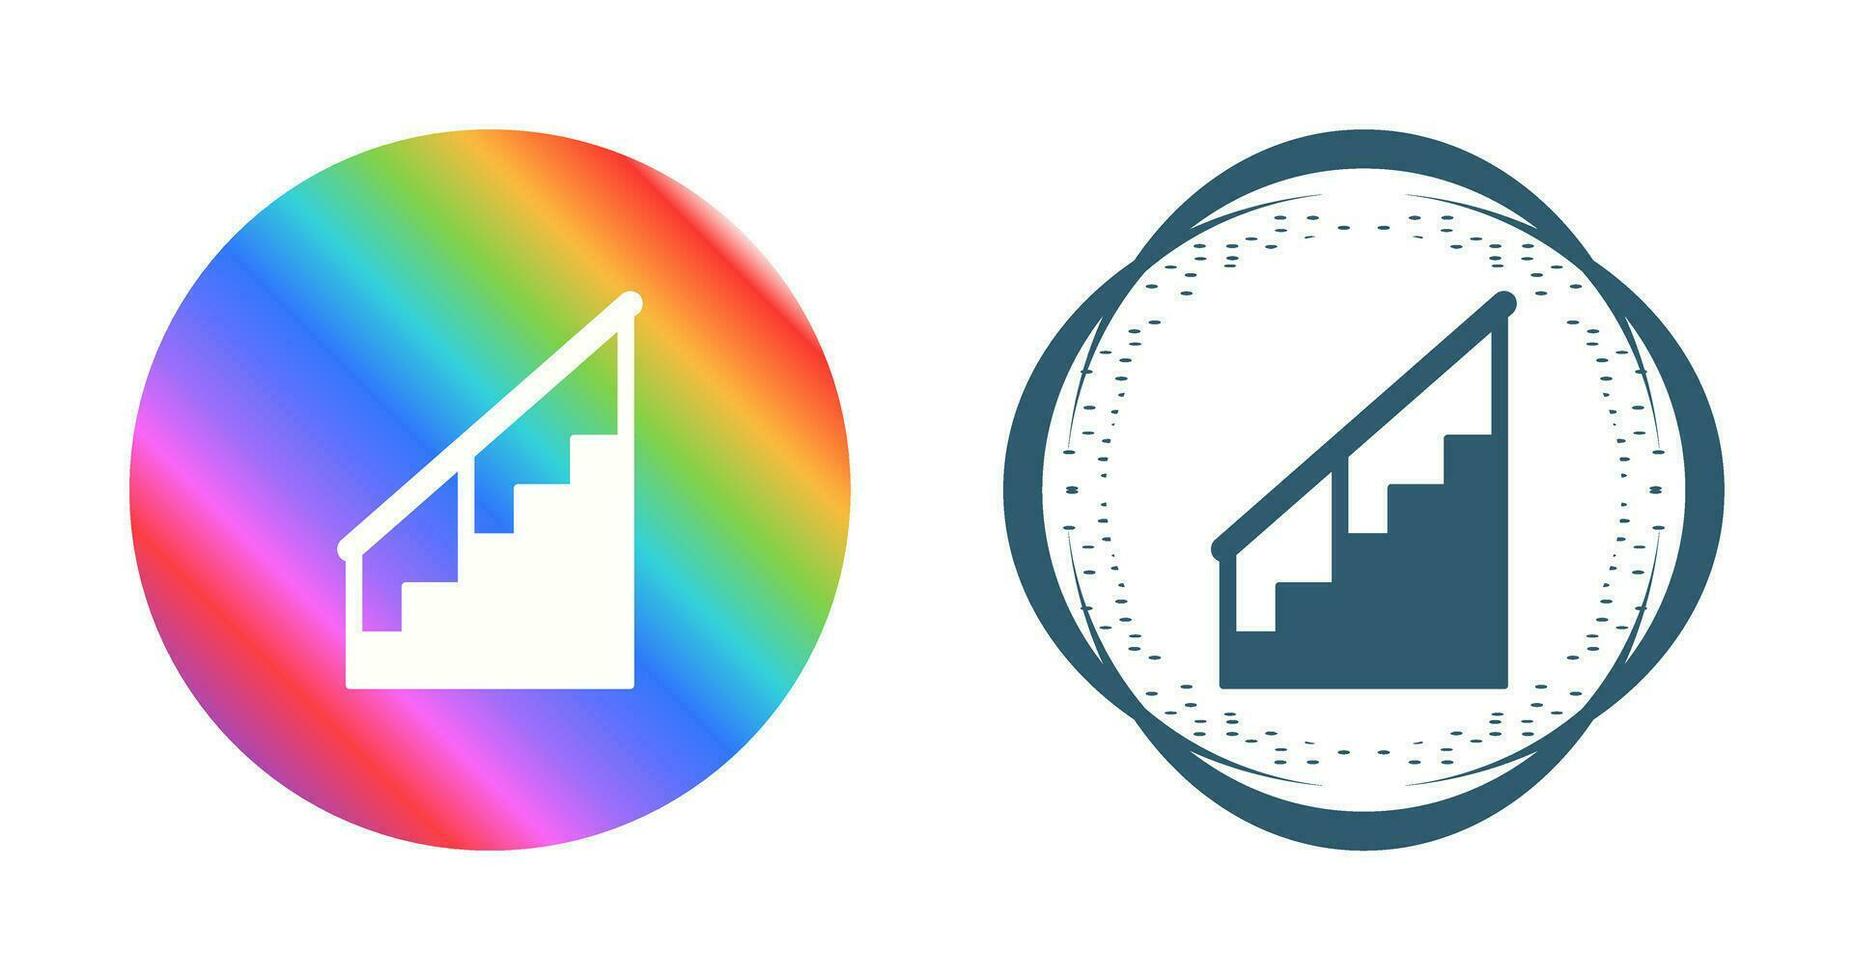 Stairs Vector Icon